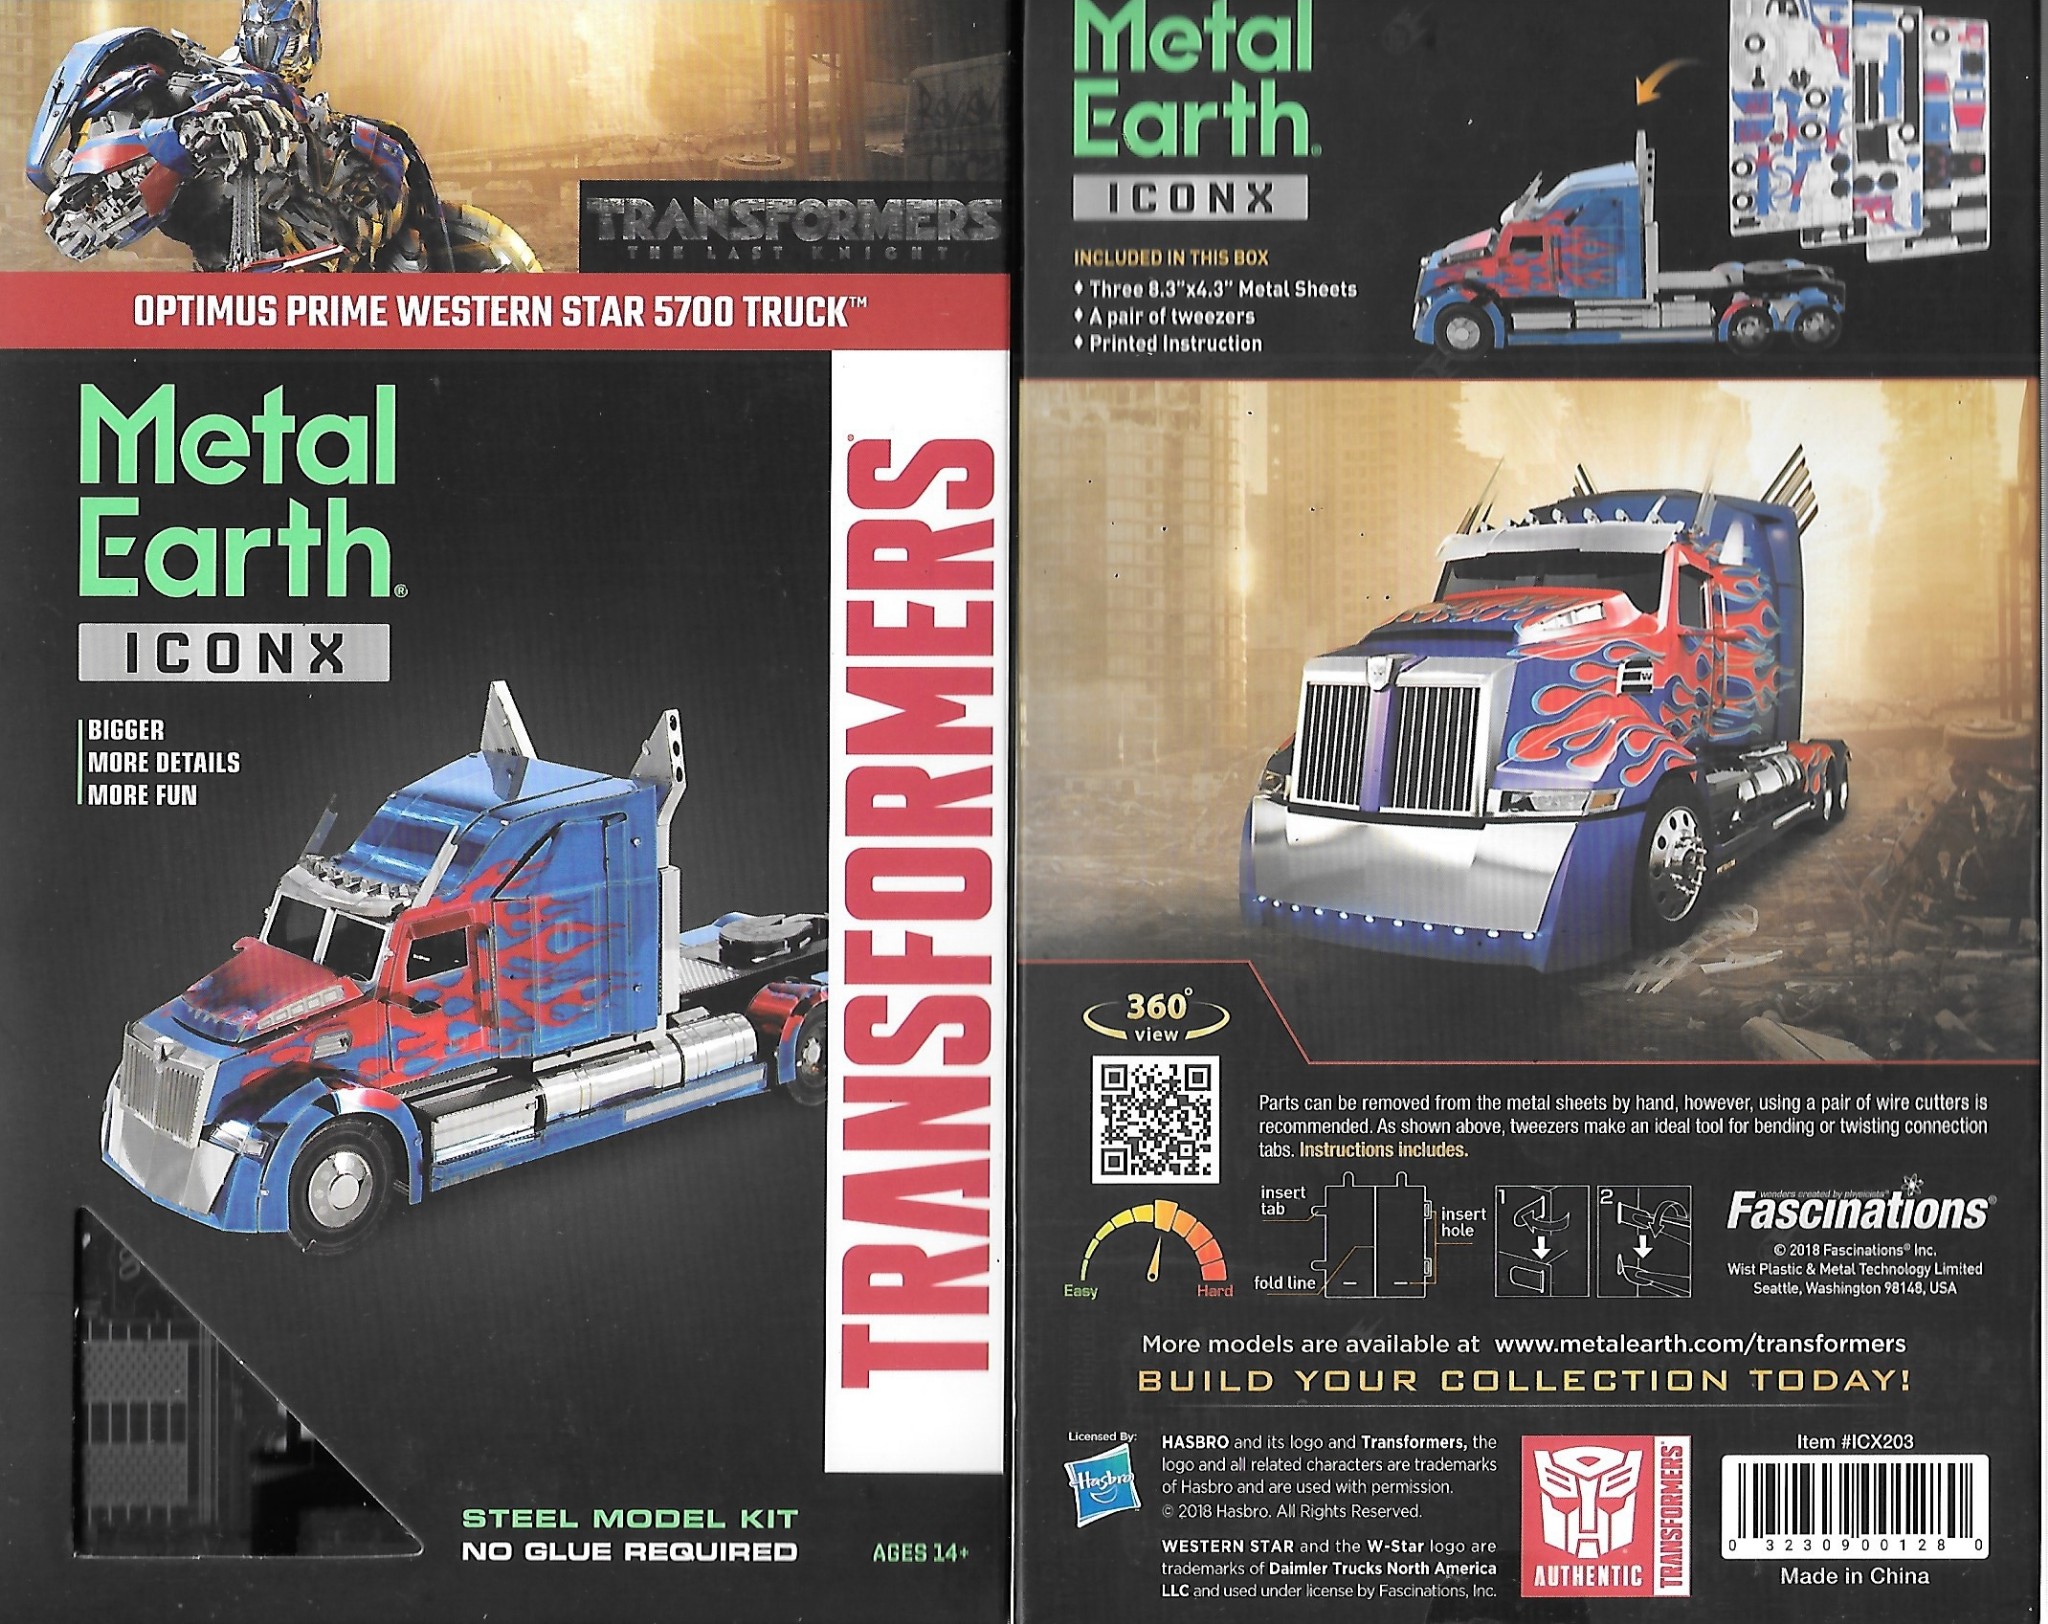 Fascinations ICONX Transformers Optimus Prime Western Star 5700 Truck 3d Metal for sale online 